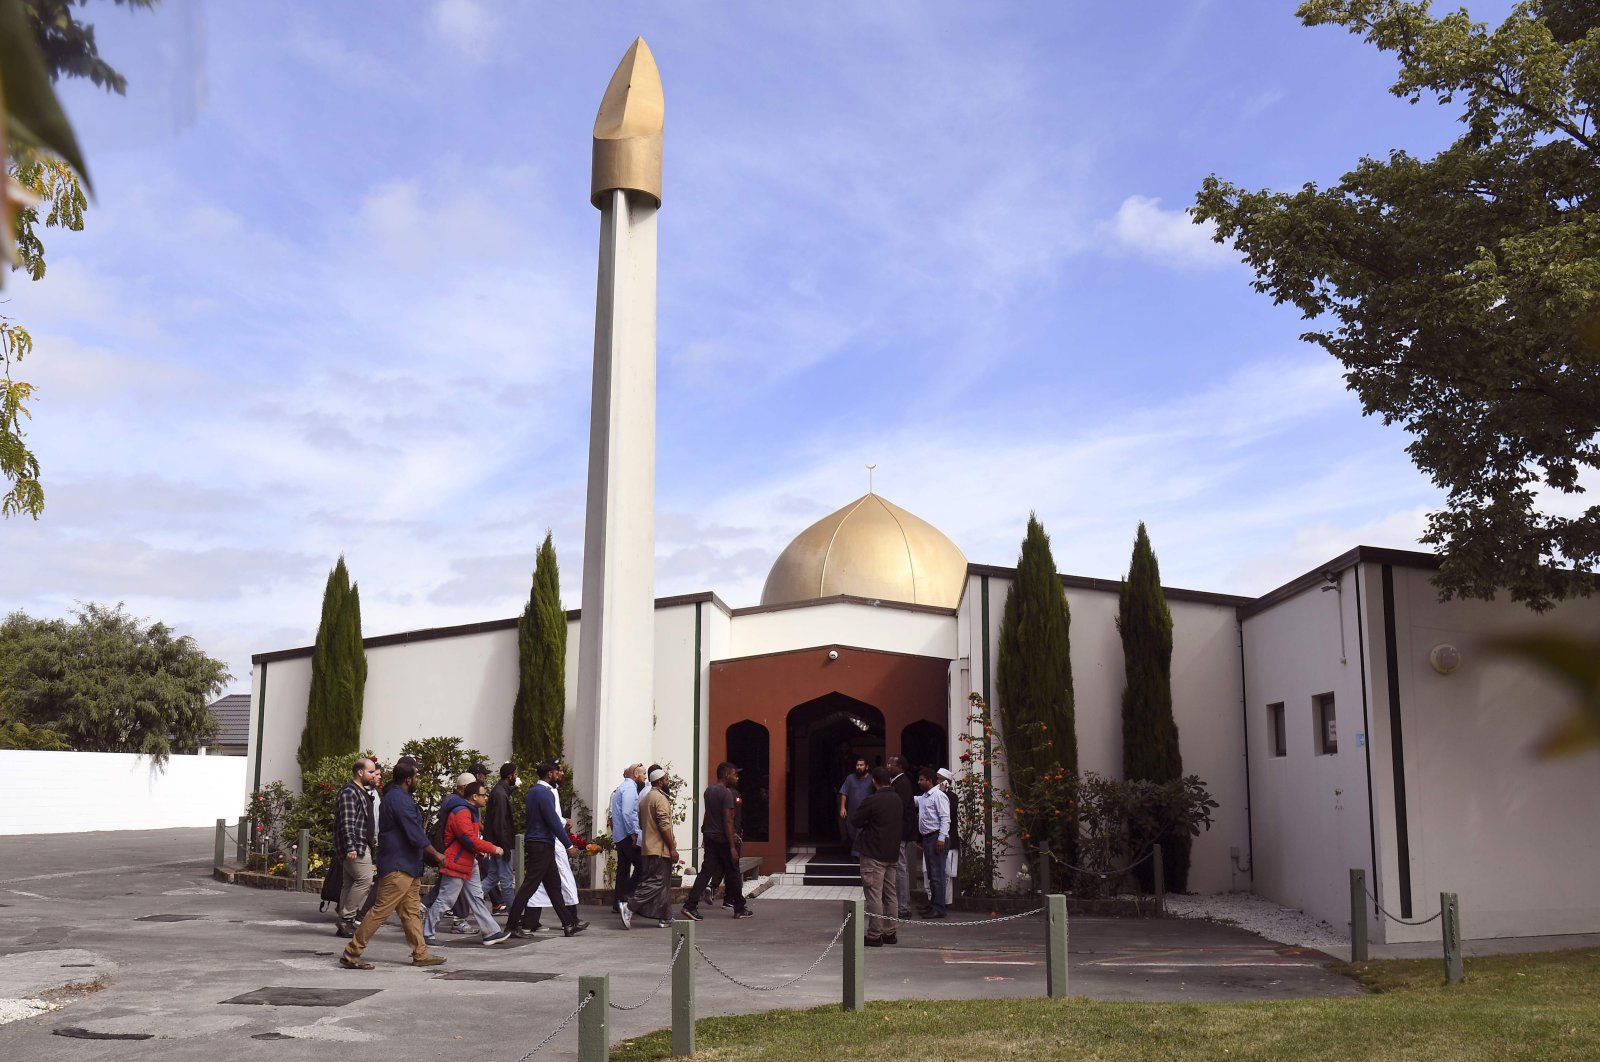 Members of the local Muslim community enter the Al Noor mosque after it was reopened in Christchurch, New Zealand, March 23, 2019. (AFP Photo)